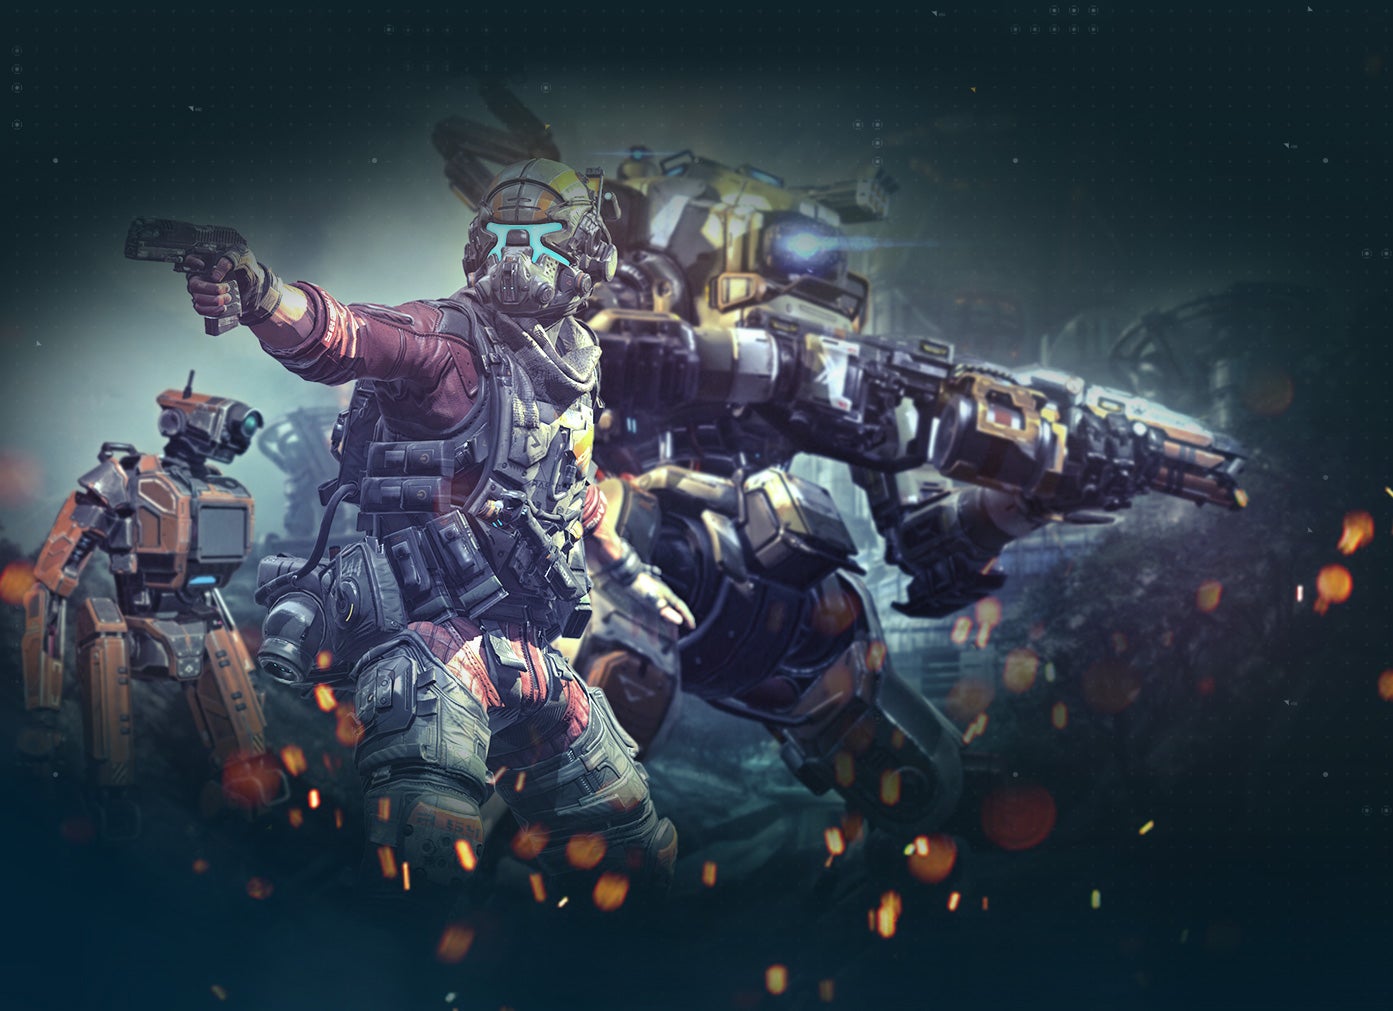 Image for You'll be able to communicate with your Titan BT-7274 in Titanfall 2's single-player campaign